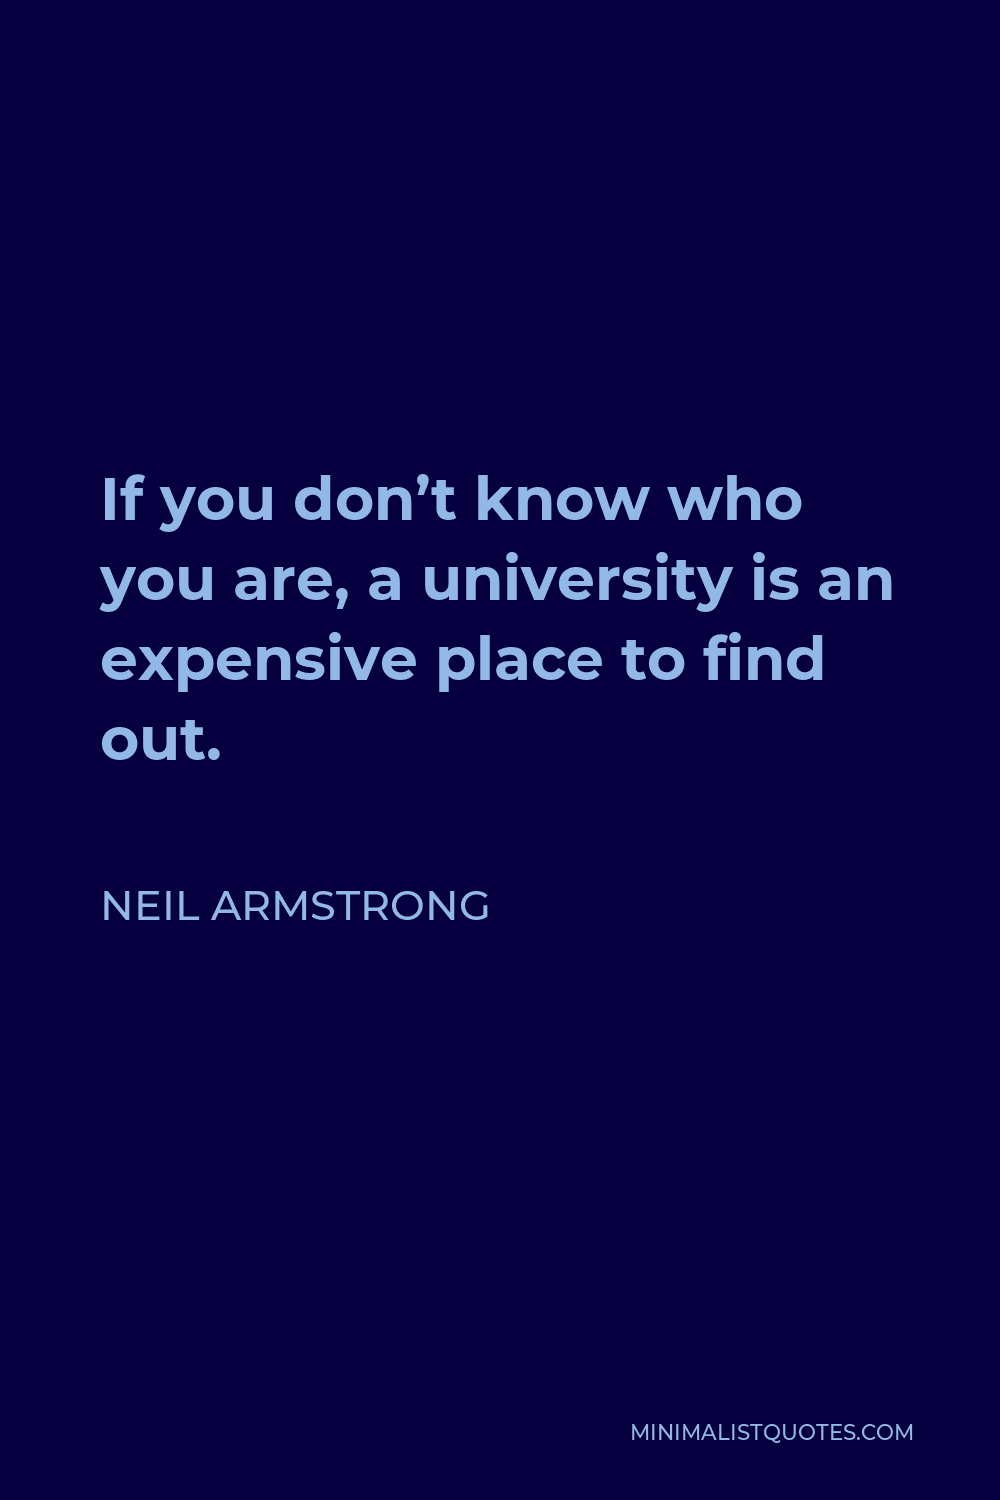 Neil Armstrong Quote - If you don’t know who you are, a university is an expensive place to find out.